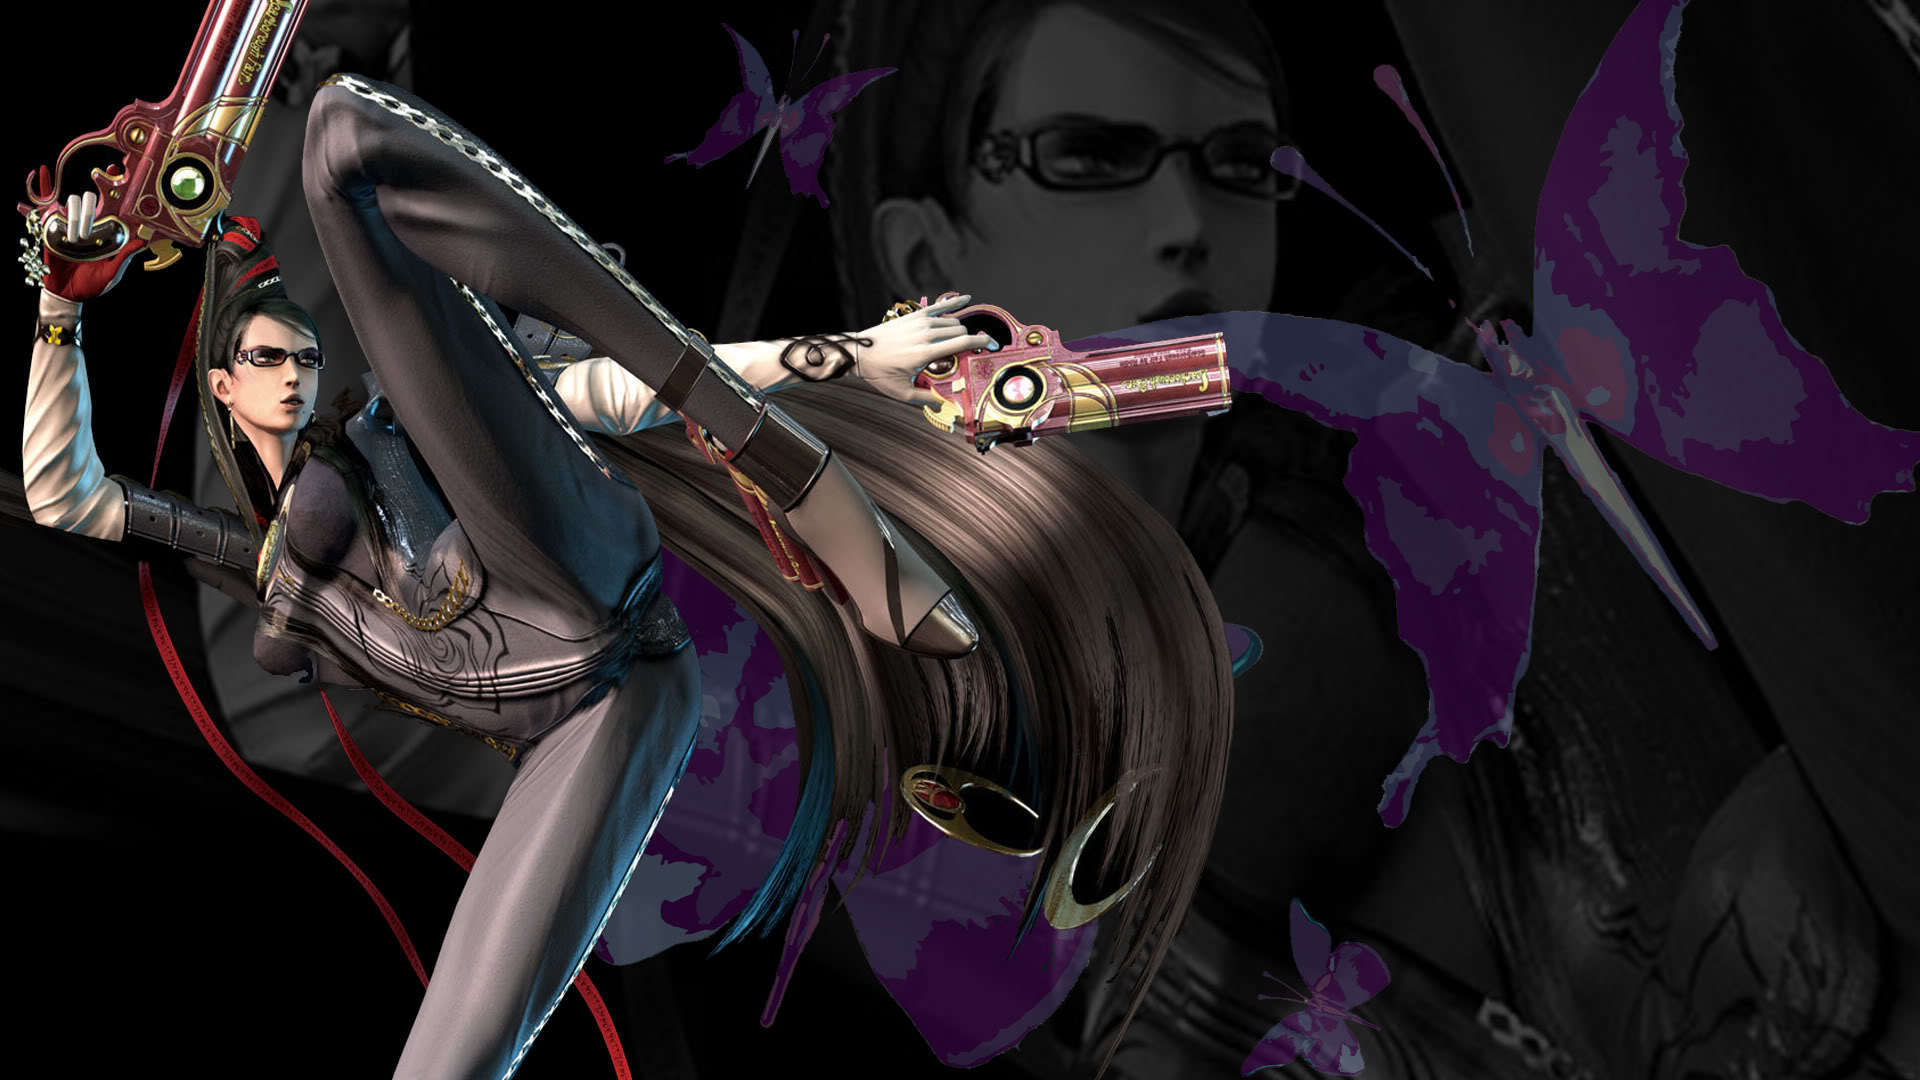 Free Download Bayonetta Butterfly Bayonetta Wallpaper 19x1080 For Your Desktop Mobile Tablet Explore 74 Bayonetta Wallpaper Nintendo Wallpapers Bayonetta Wallpaper 1080p Bayonetta Iphone Wallpaper